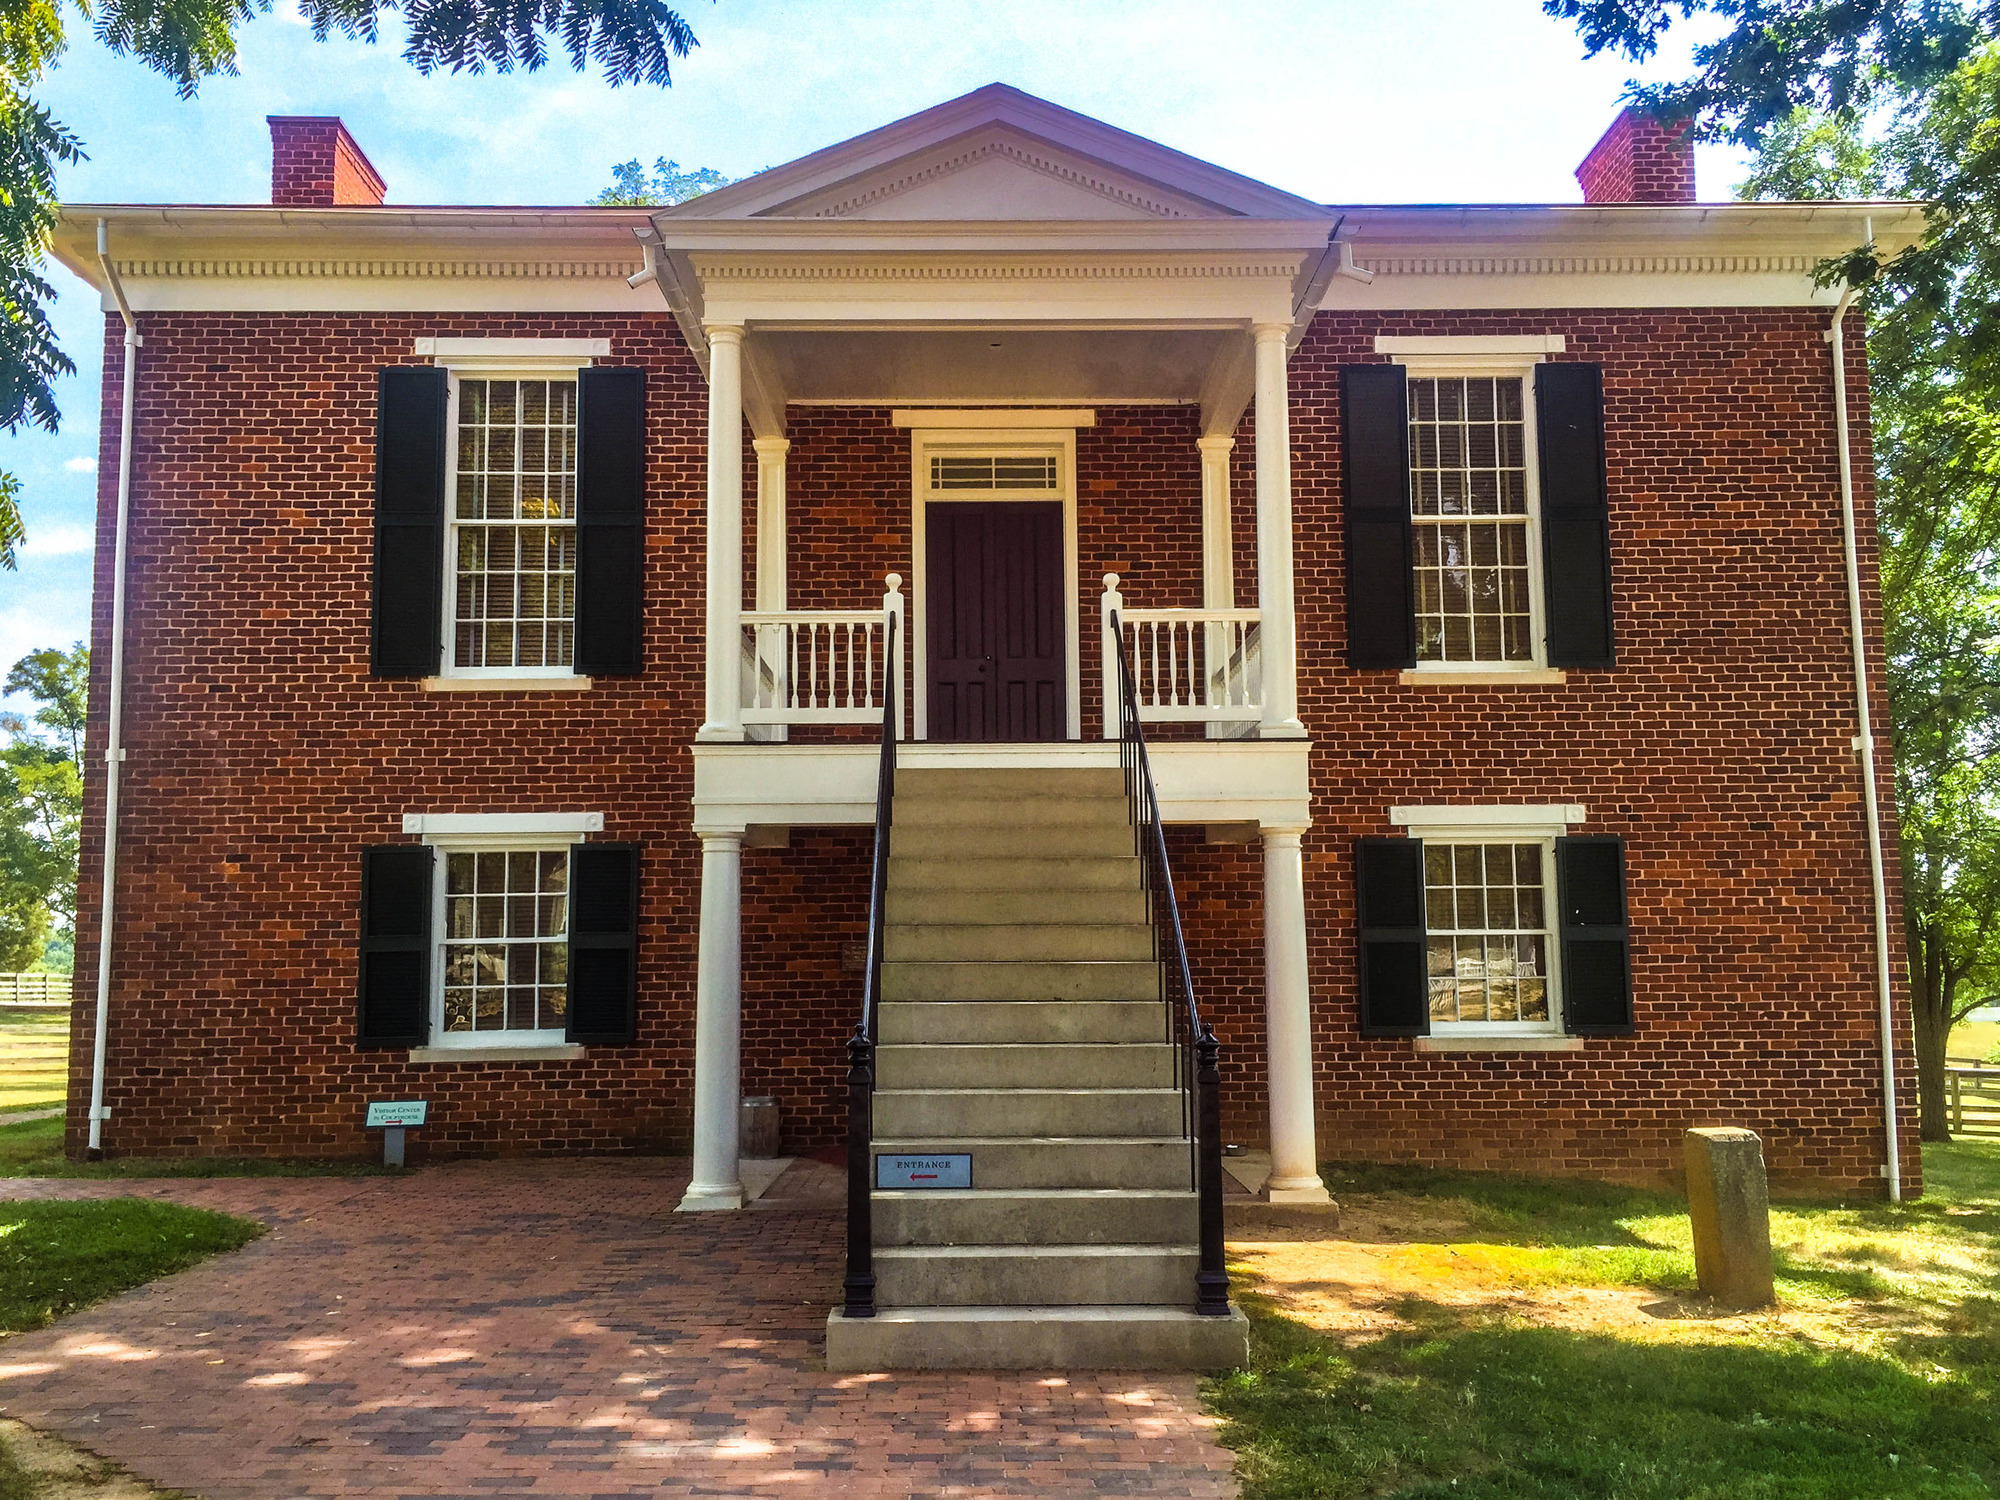 Appomattox Court House is a two story brick building with four windows and an outdoor stairway going to the second floor.